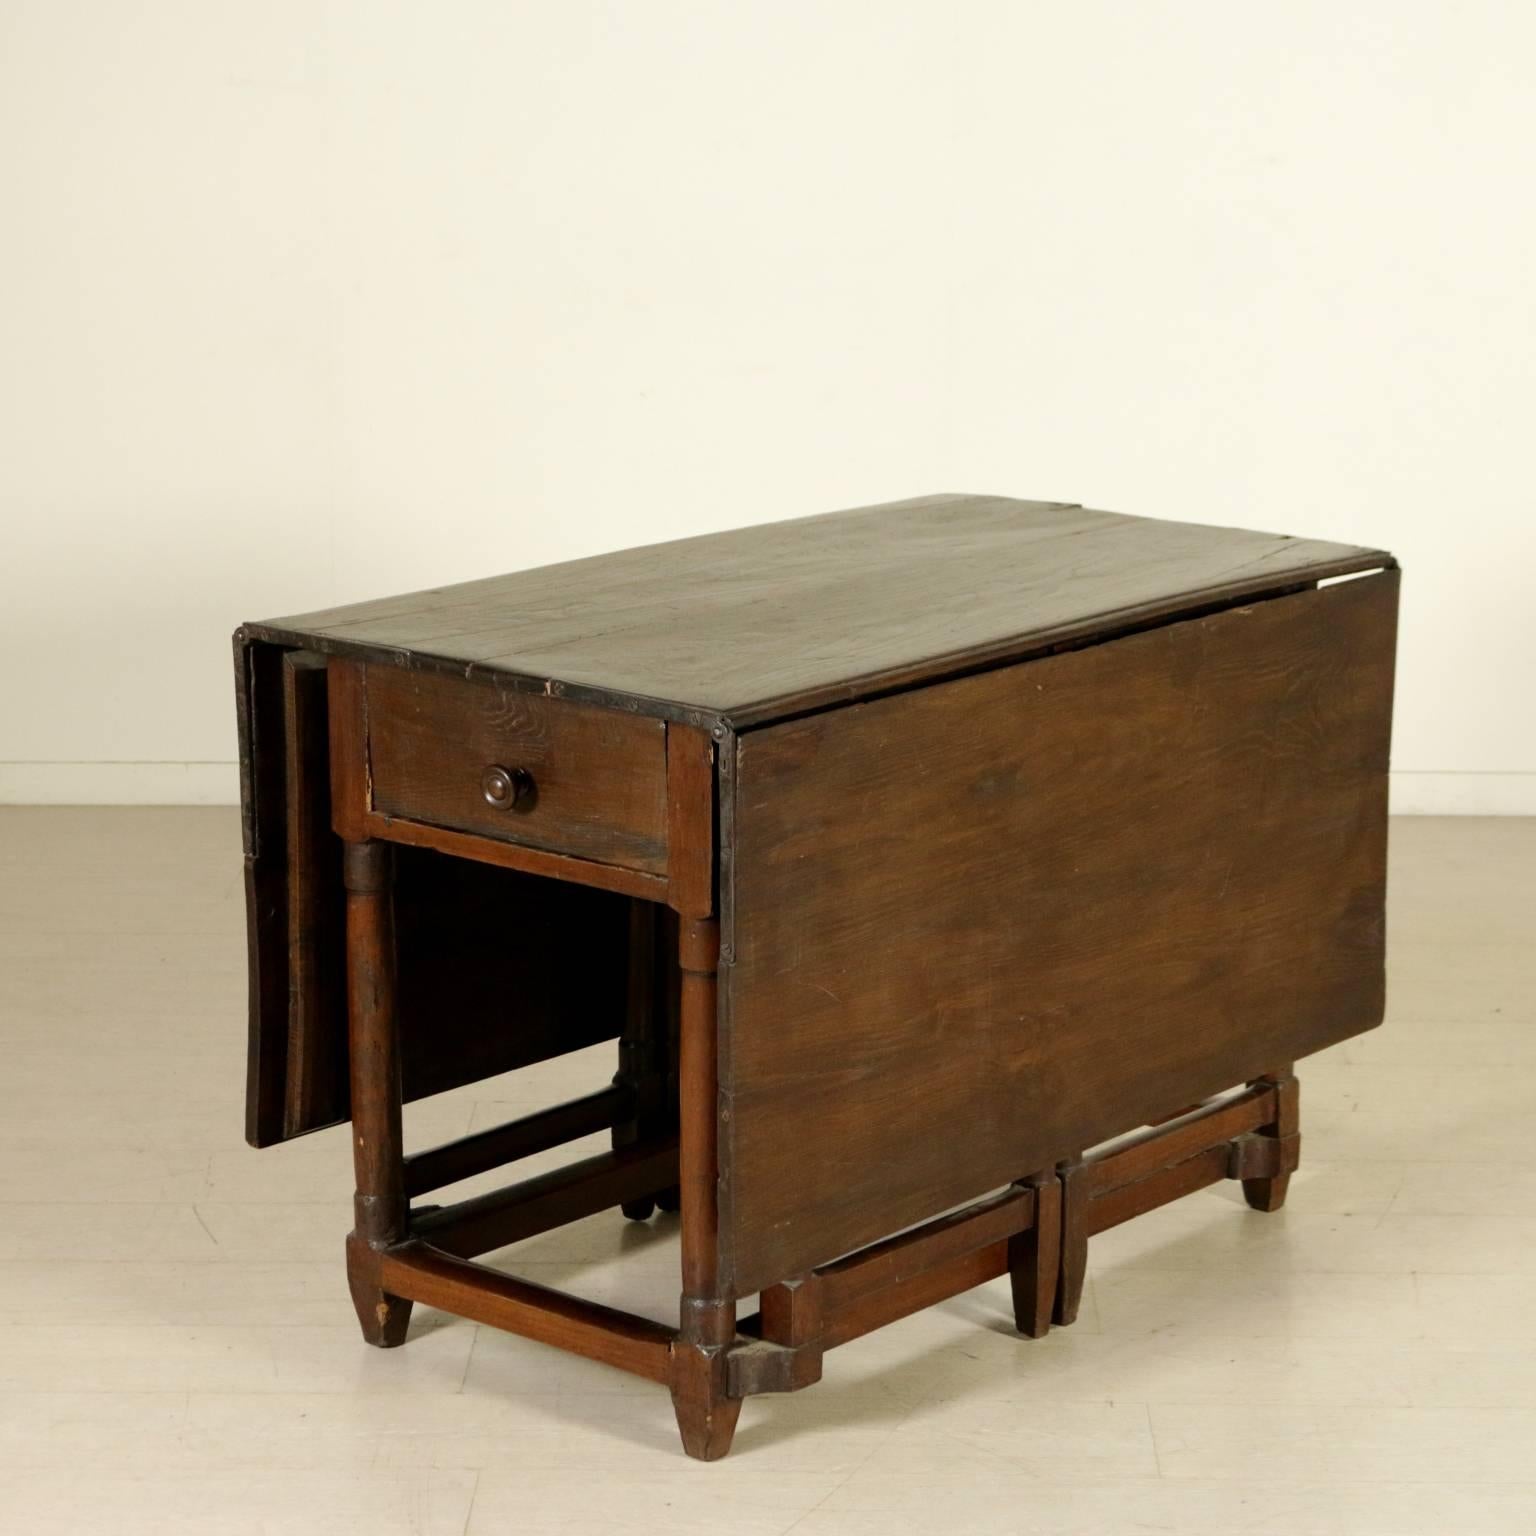 English oak drop flap table with turned legs joined by stretchers and a drawer in the front band. Wide drop flaps on the sides, hold by openable legs. Manufactured in England, 19th century.